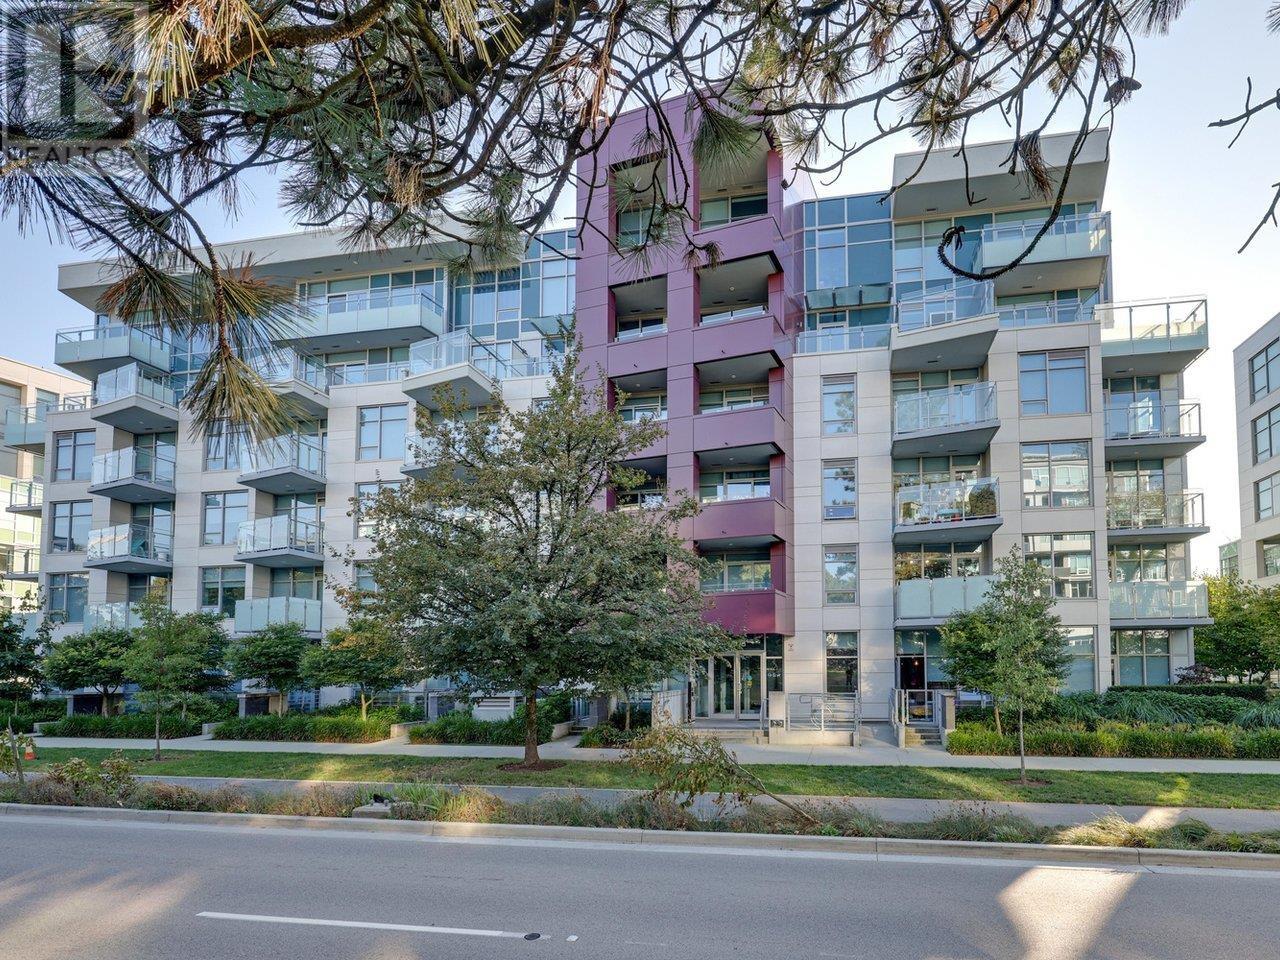 504 5033 CAMBIE STREET, vancouver, British Columbia V5Z0H6